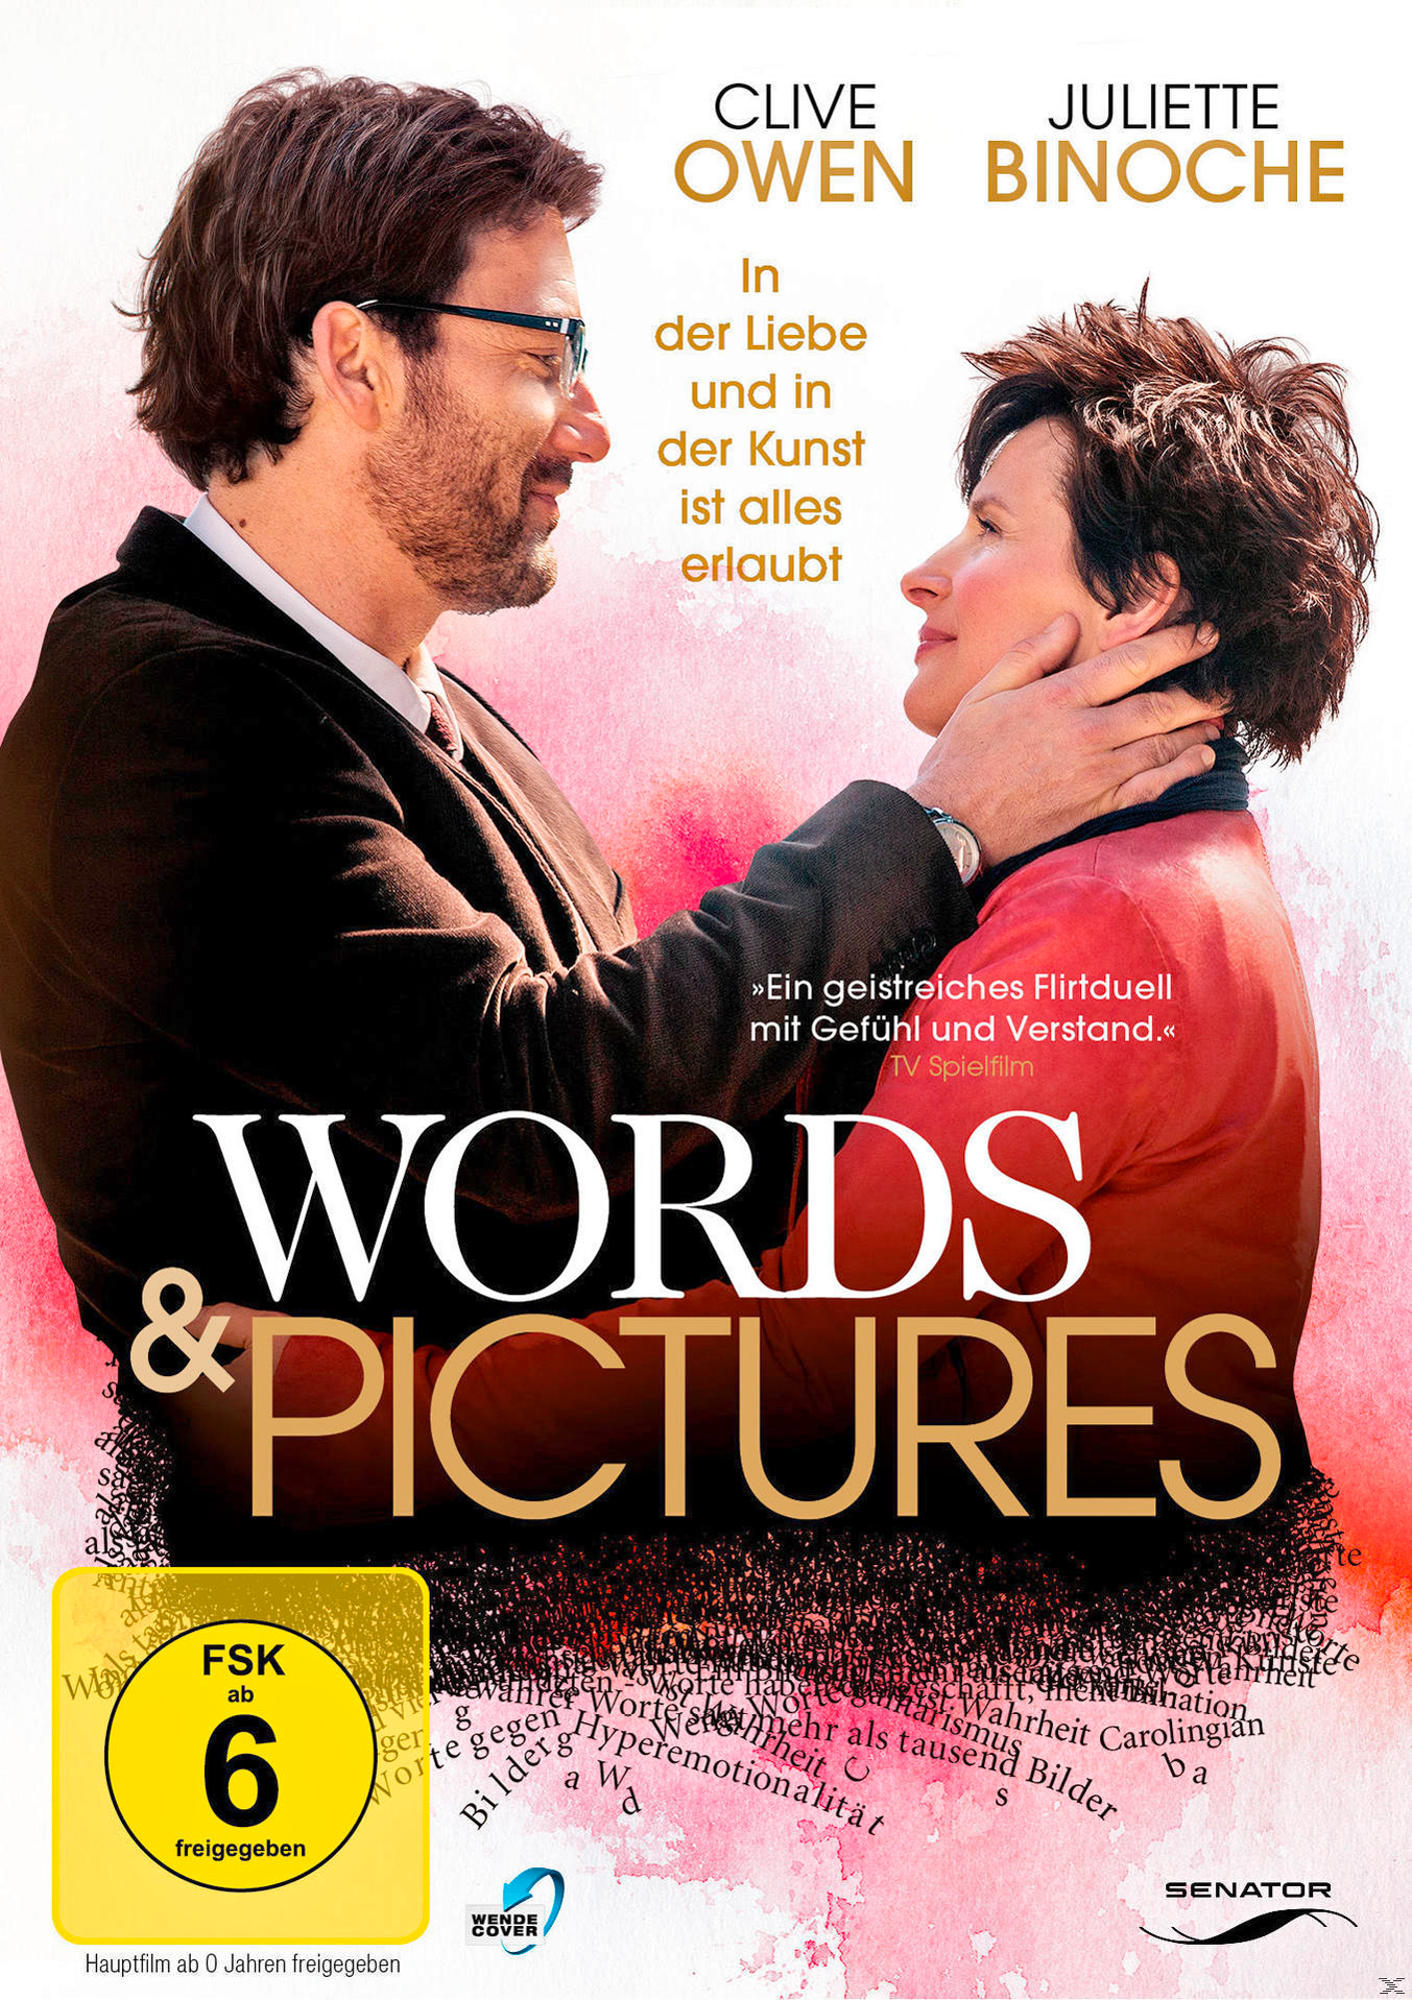 DVD AND WORDS PICTURES